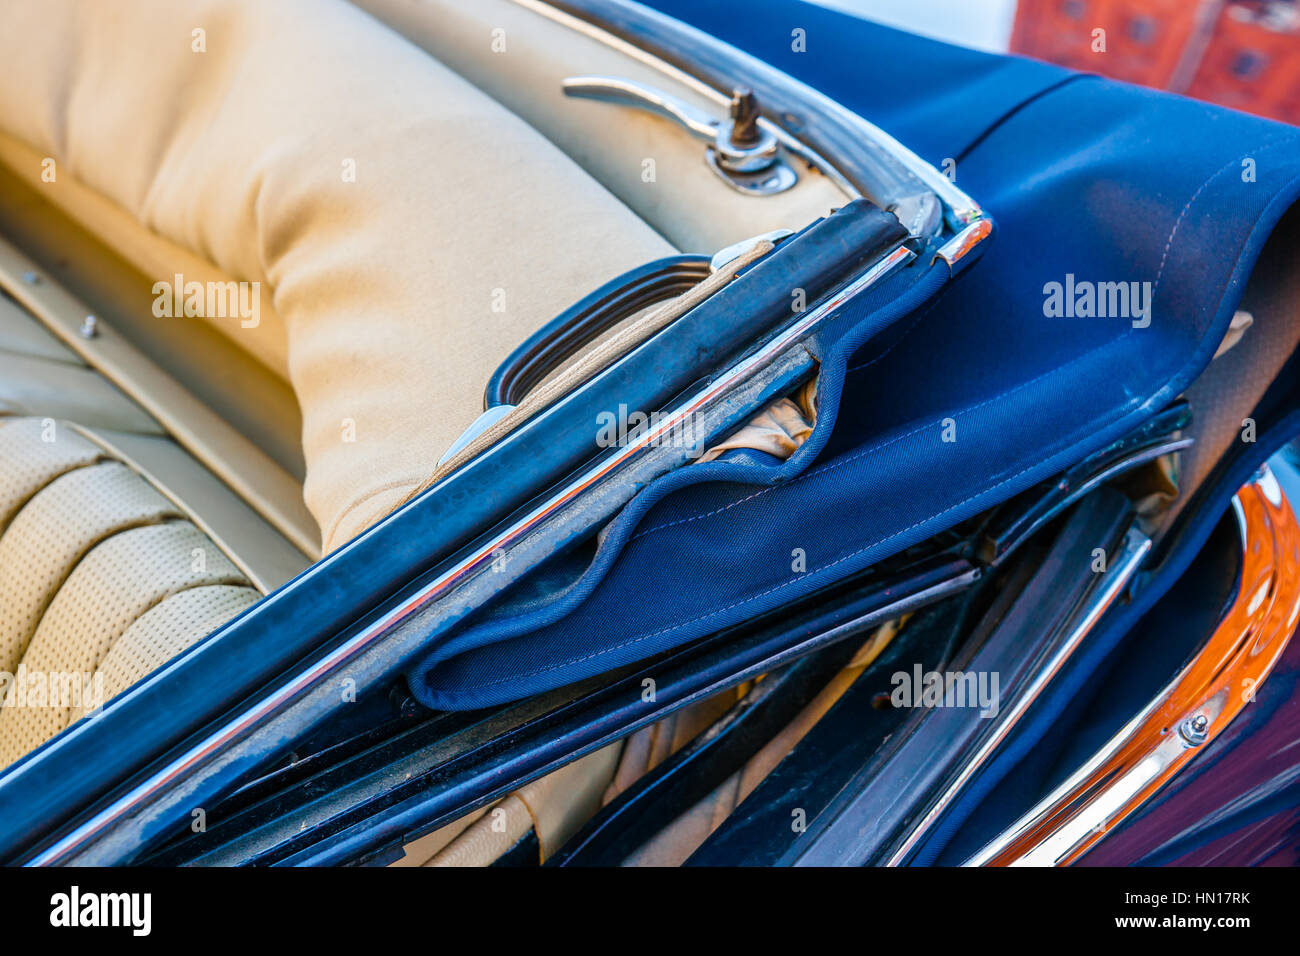 Color and beauty of vintage cars. Convertible top of an old luxury automobile. Leather seats. Vibrant colors. Stock Photo